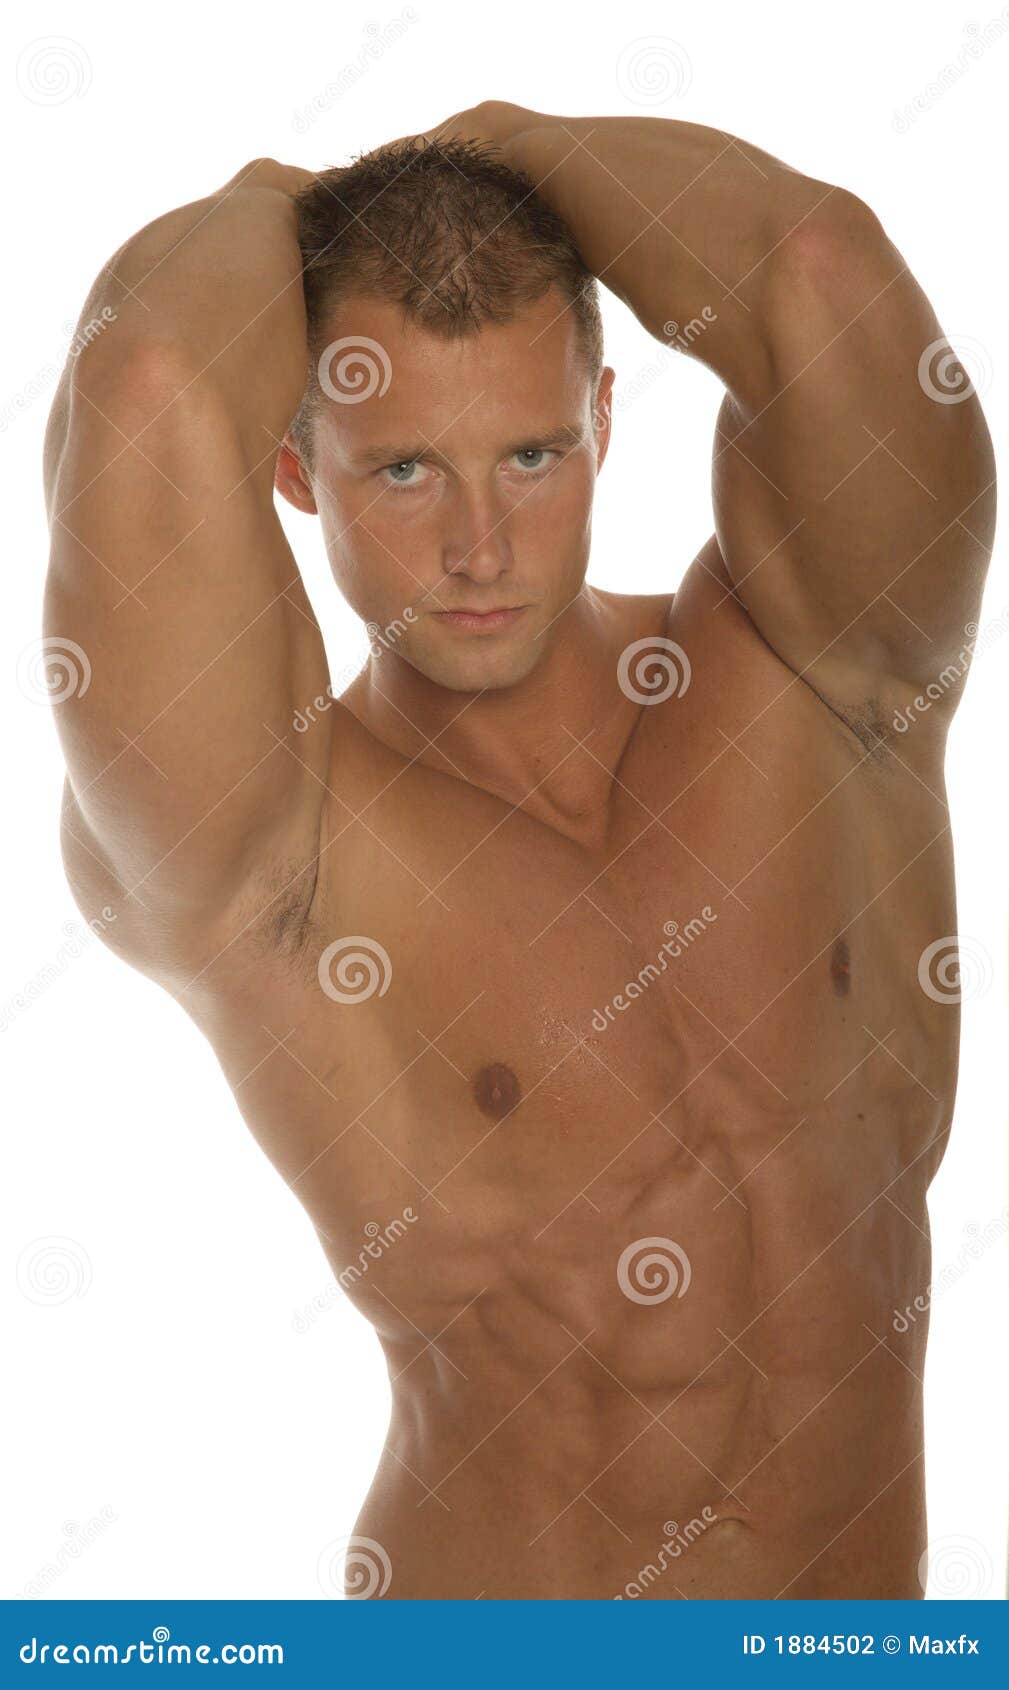 Muscular Young Wet Naked Guy Posing In Trunks Stock Photo 